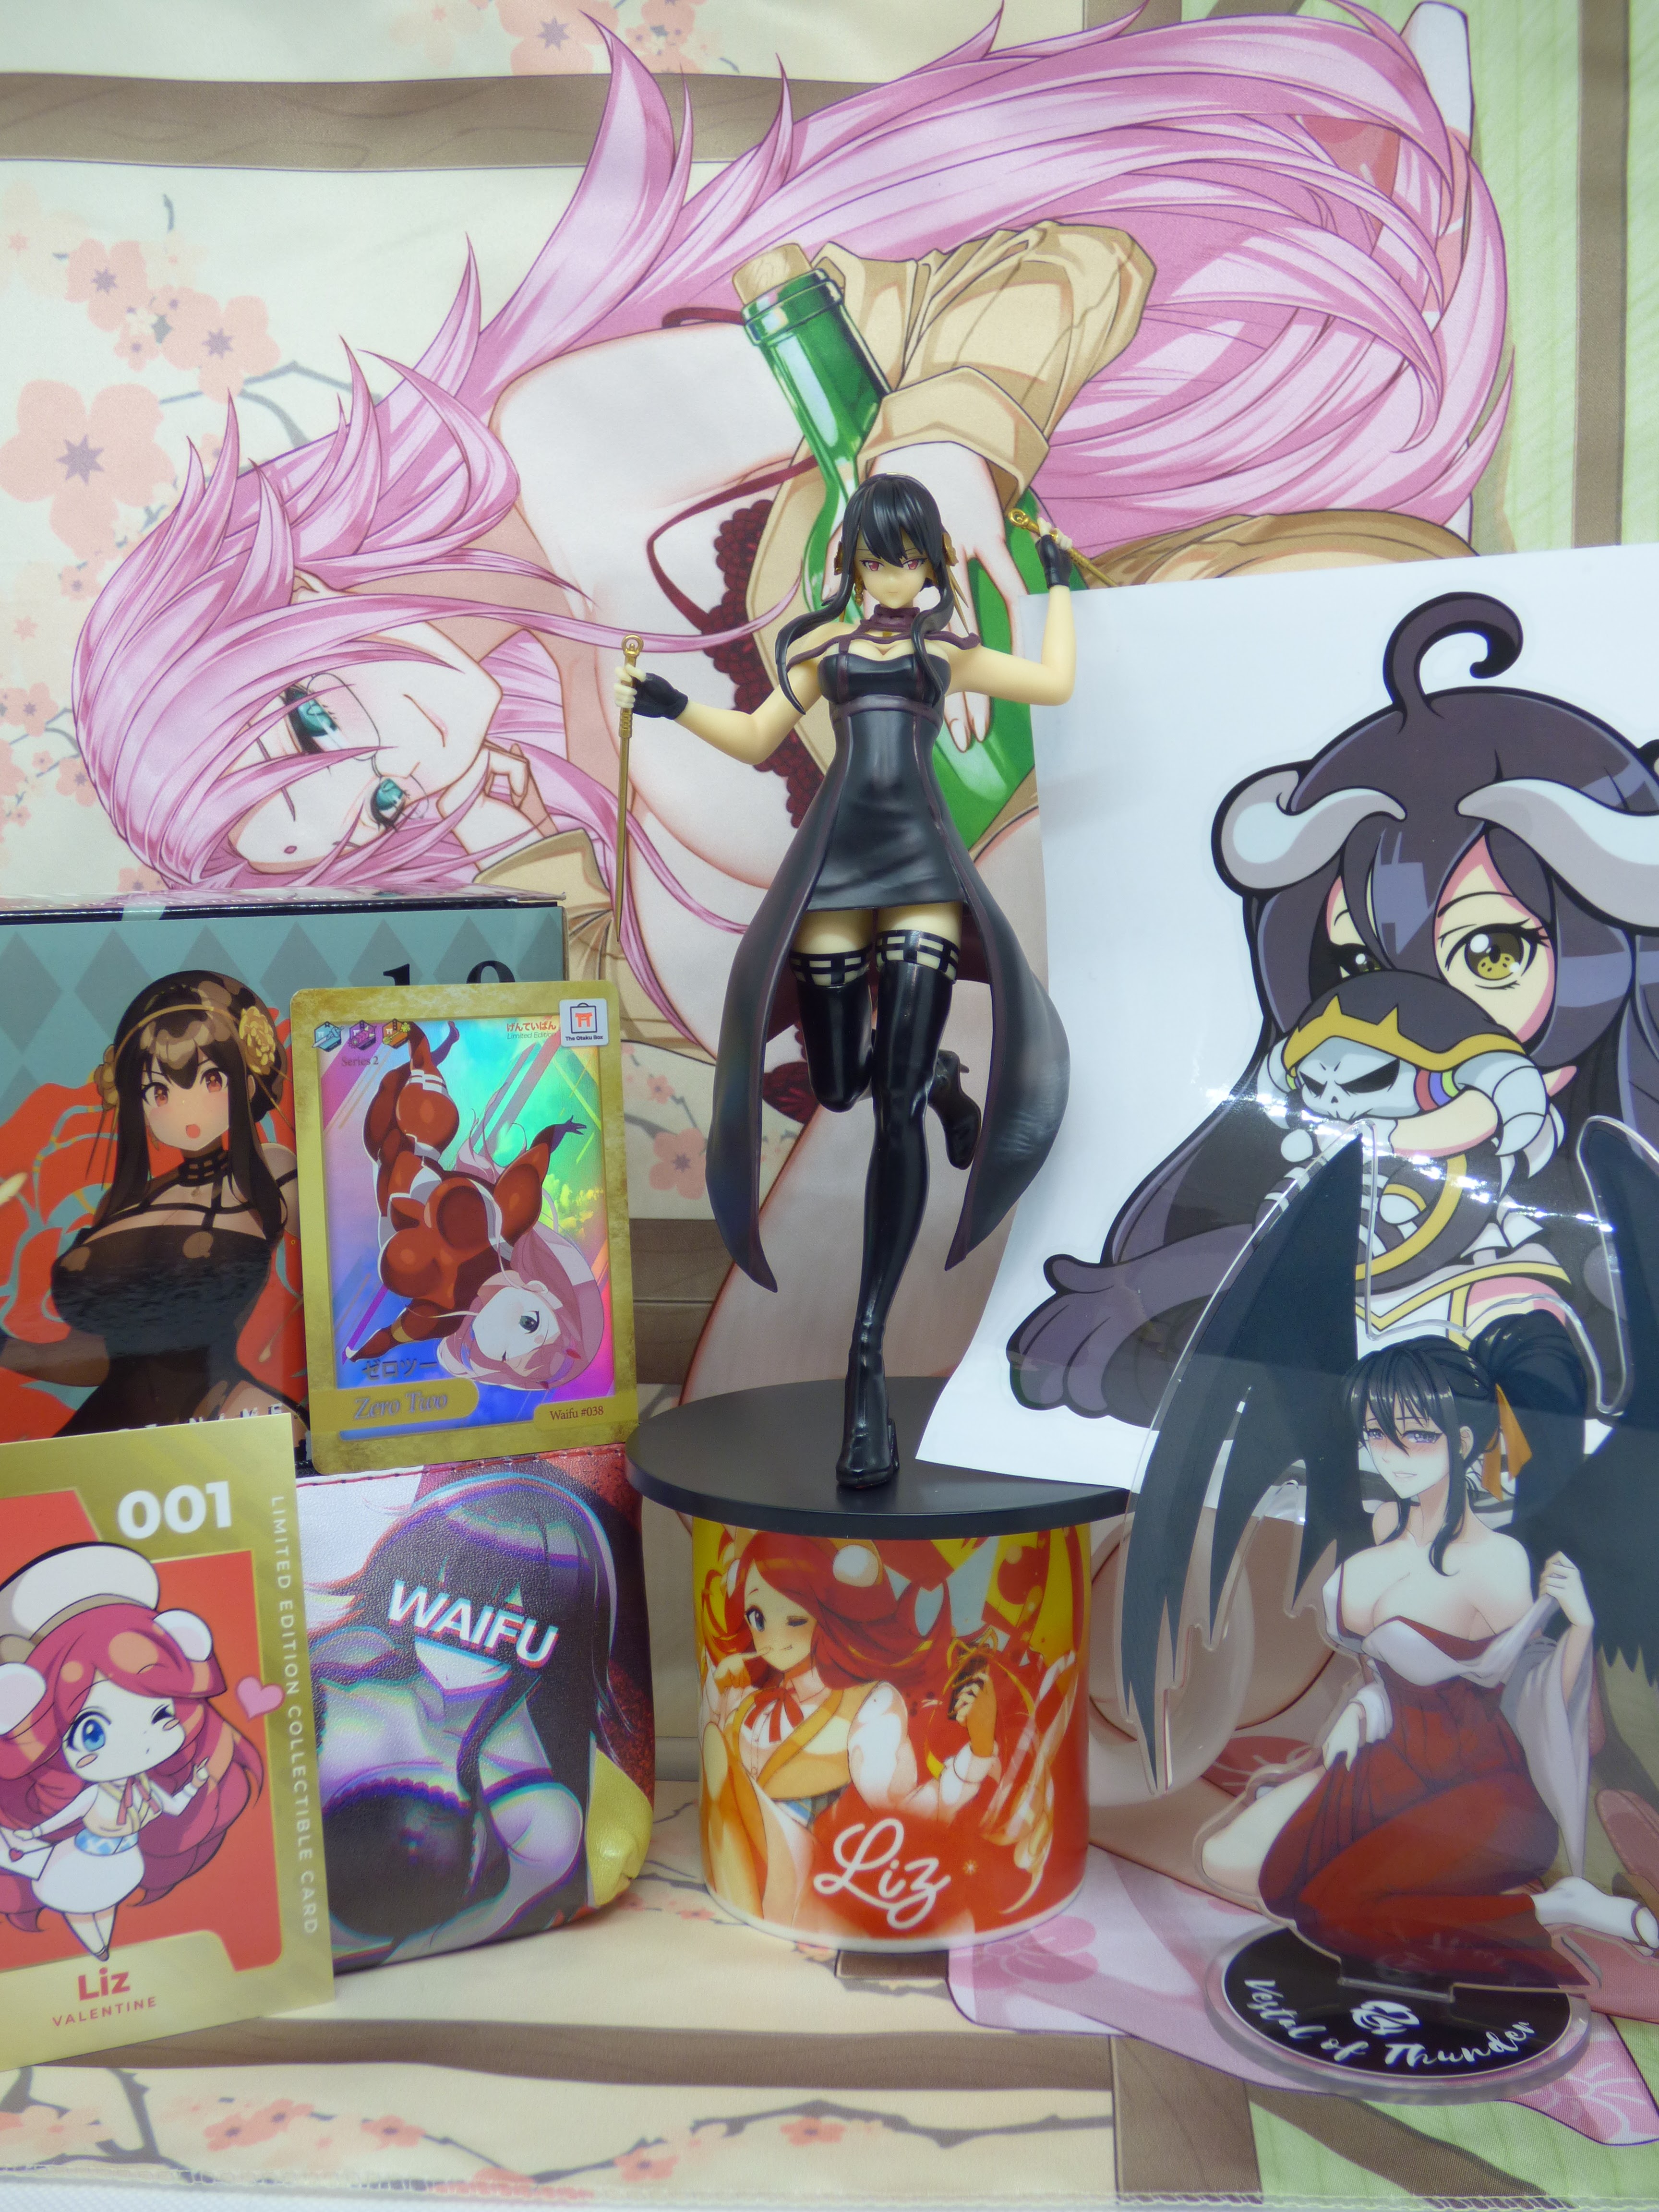 Here's A Bunch Of Bonus Goodies For Yuuna and the Haunted Hot